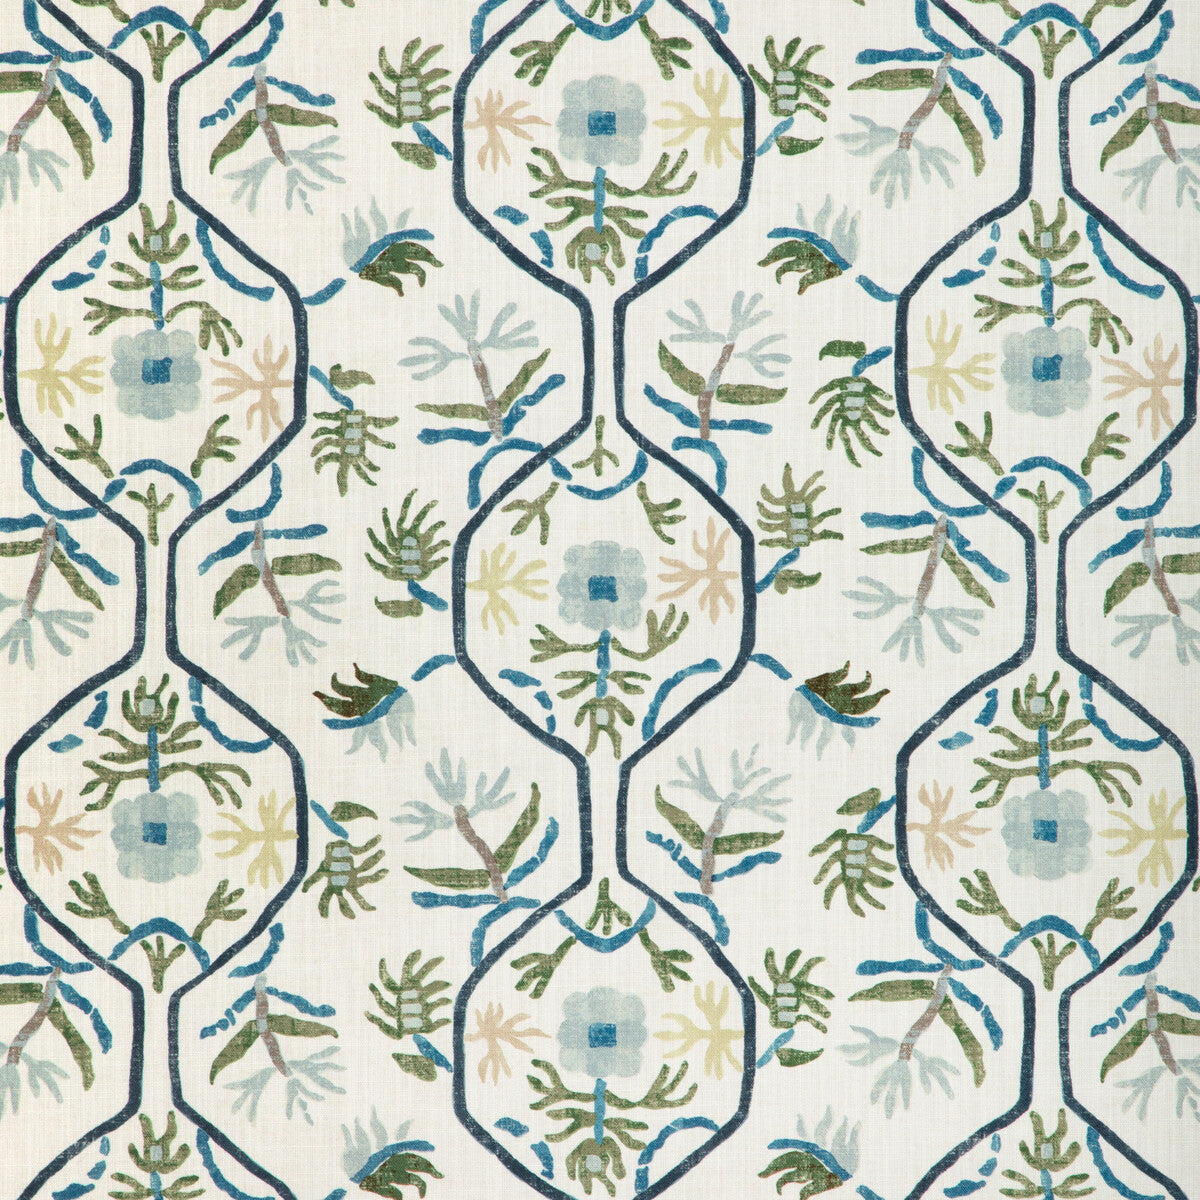 Le Jasmin Print fabric in marine color - pattern 8024110.353.0 - by Brunschwig &amp; Fils in the Les Ensembliers L&